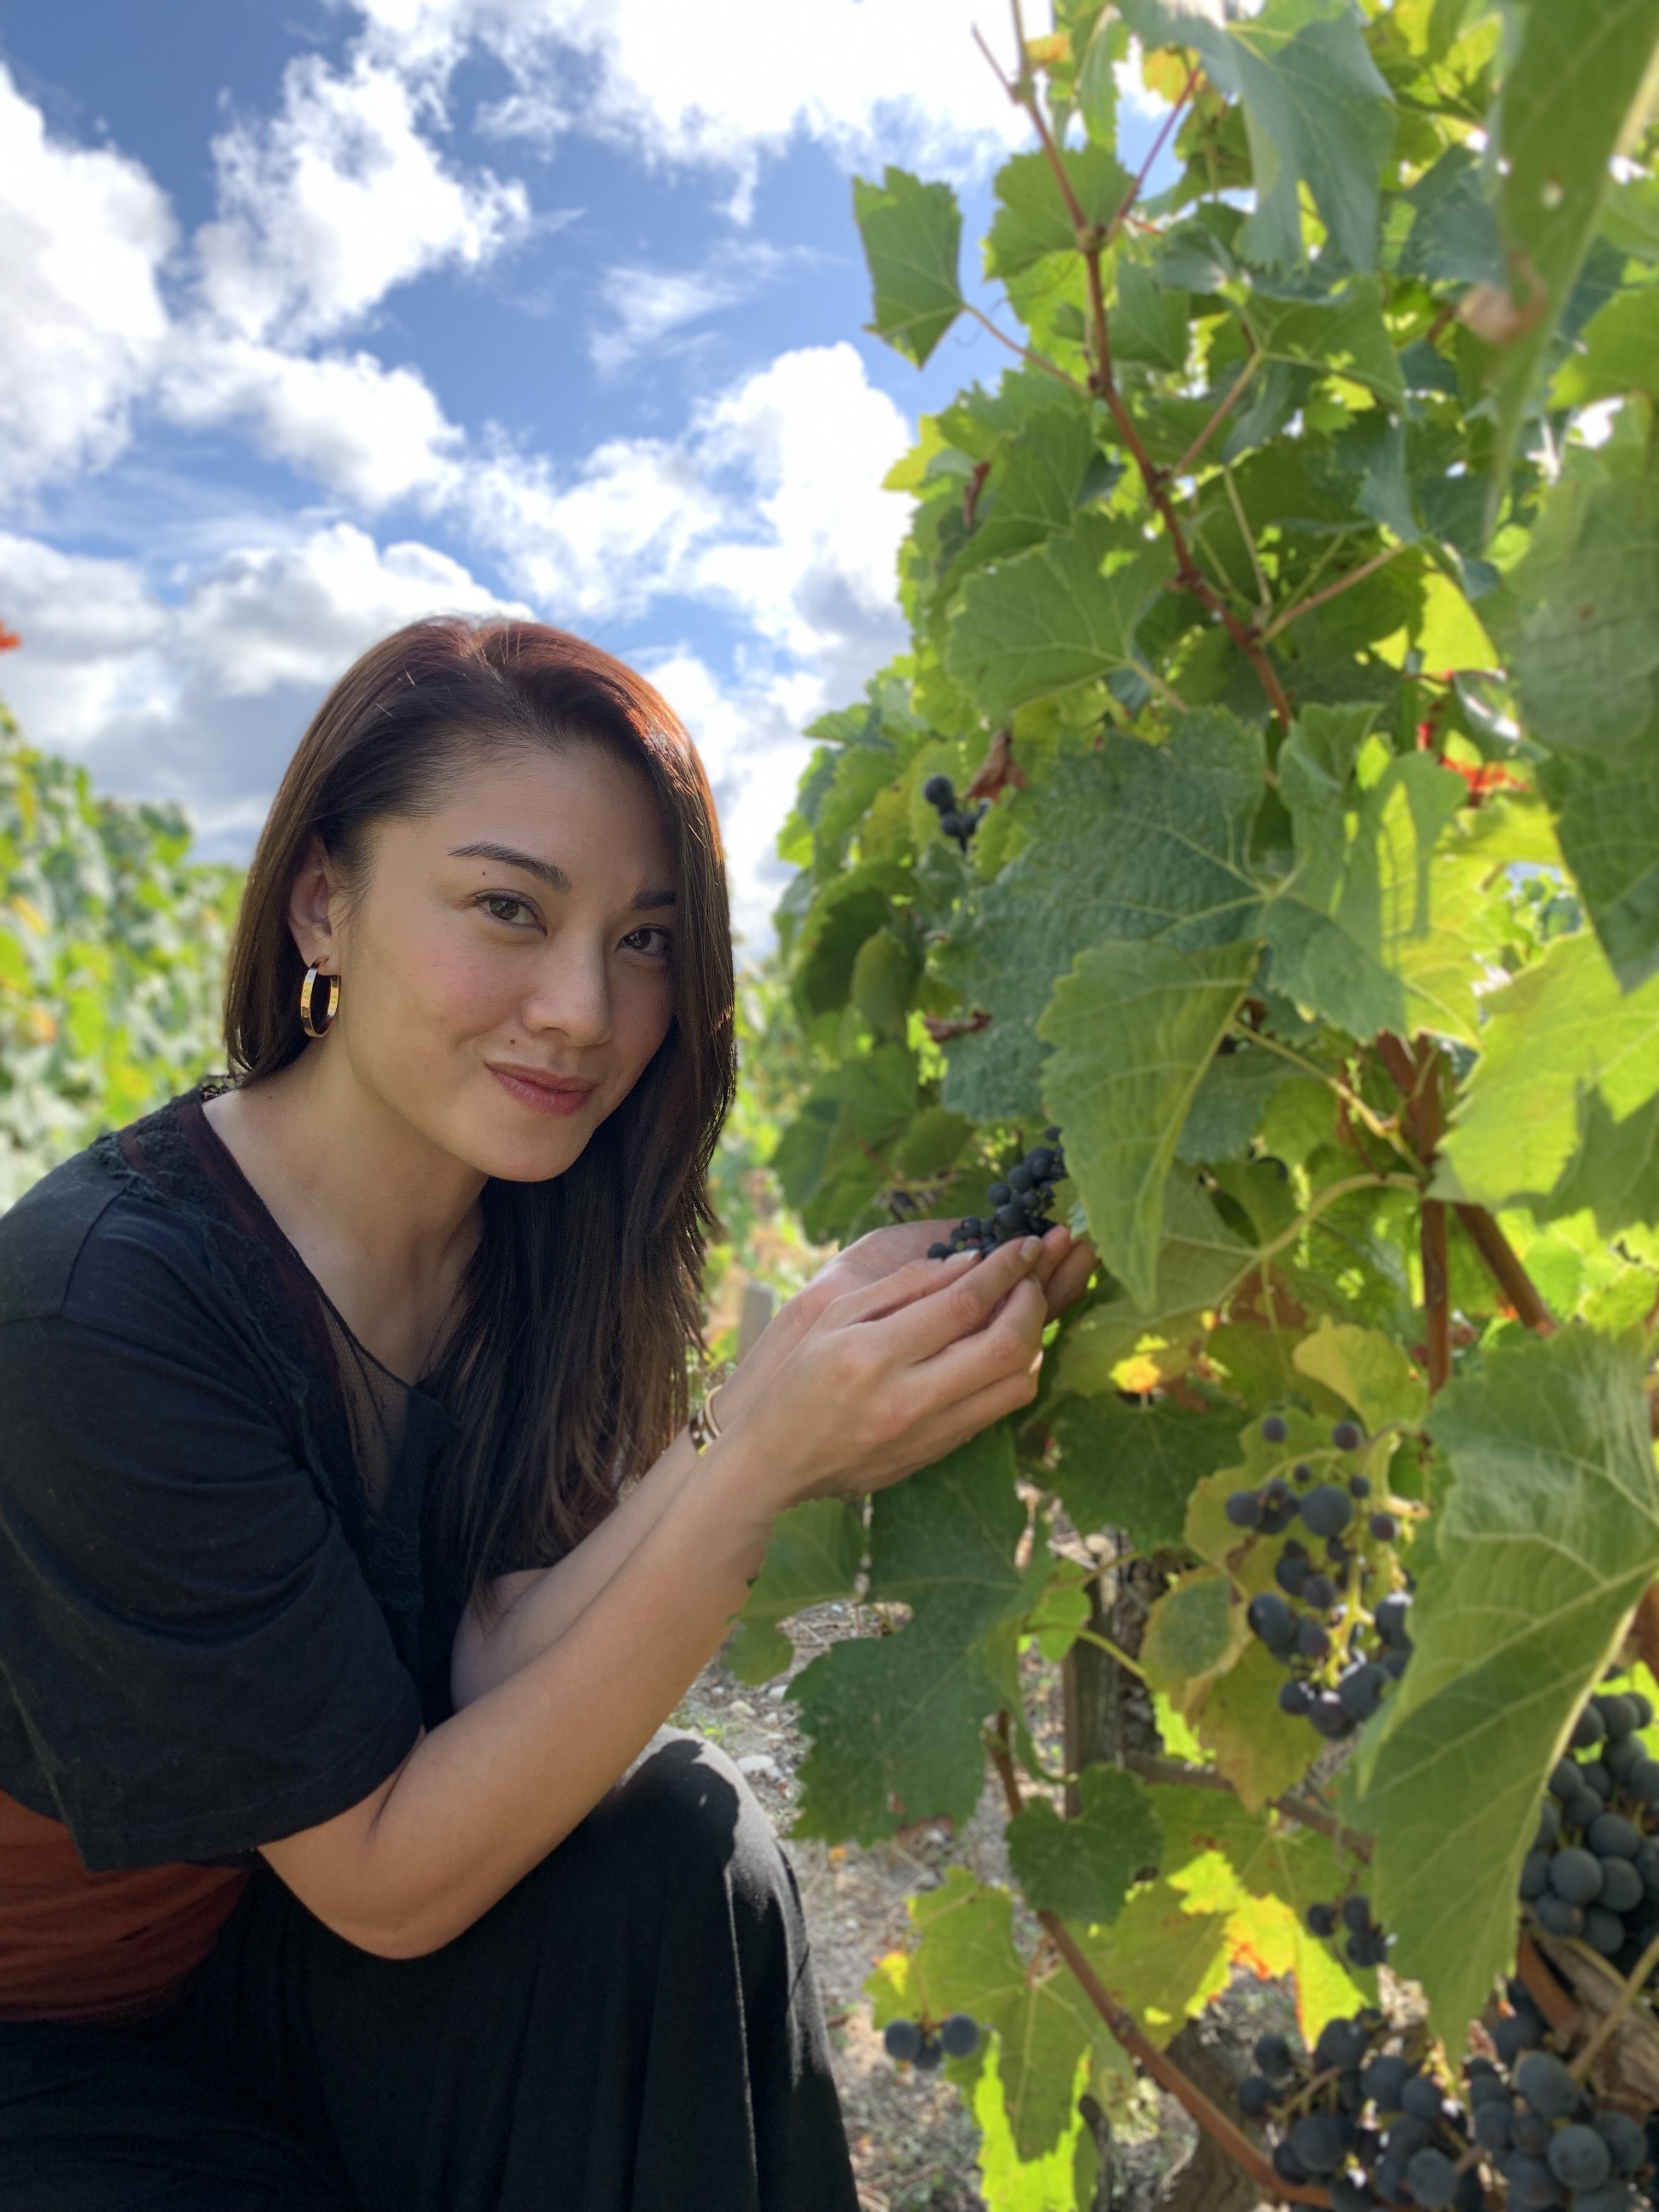 Bernice Liu’s career switch from acting to winemaking is an unconventional one – but she wouldn’t change it for the world. Photo: Handout